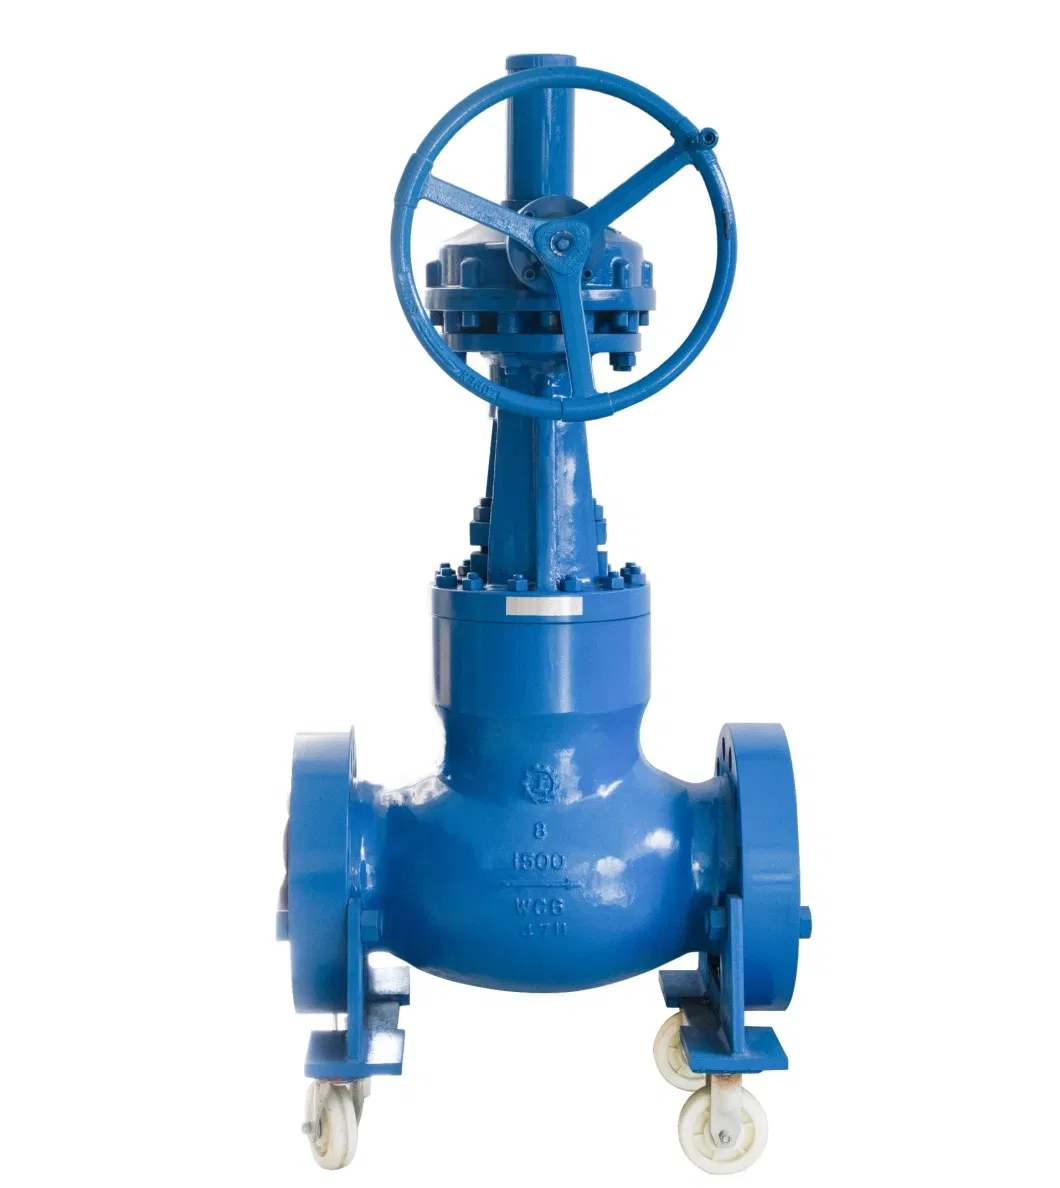 Industrial Valves Manual Flange Connection Control Stainless Steel Globe Valve